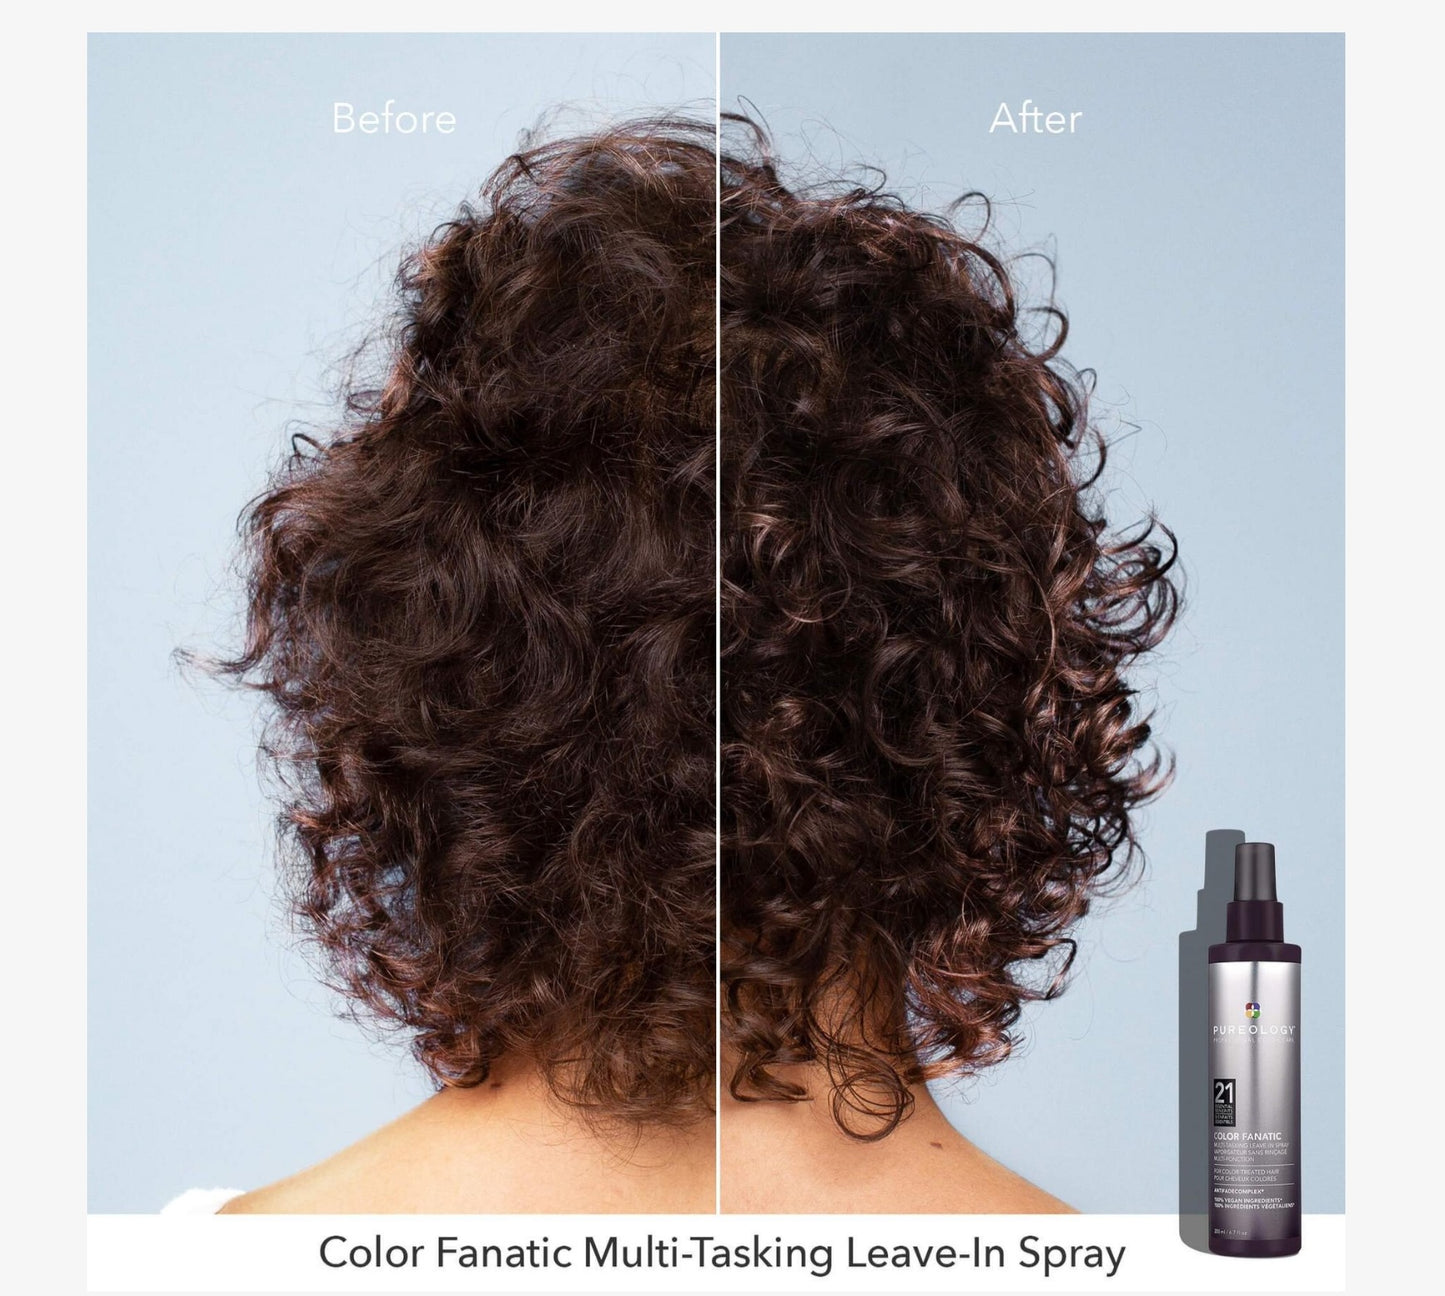 Pureology Color Fanatic Multi-Tasking Leave in Spray